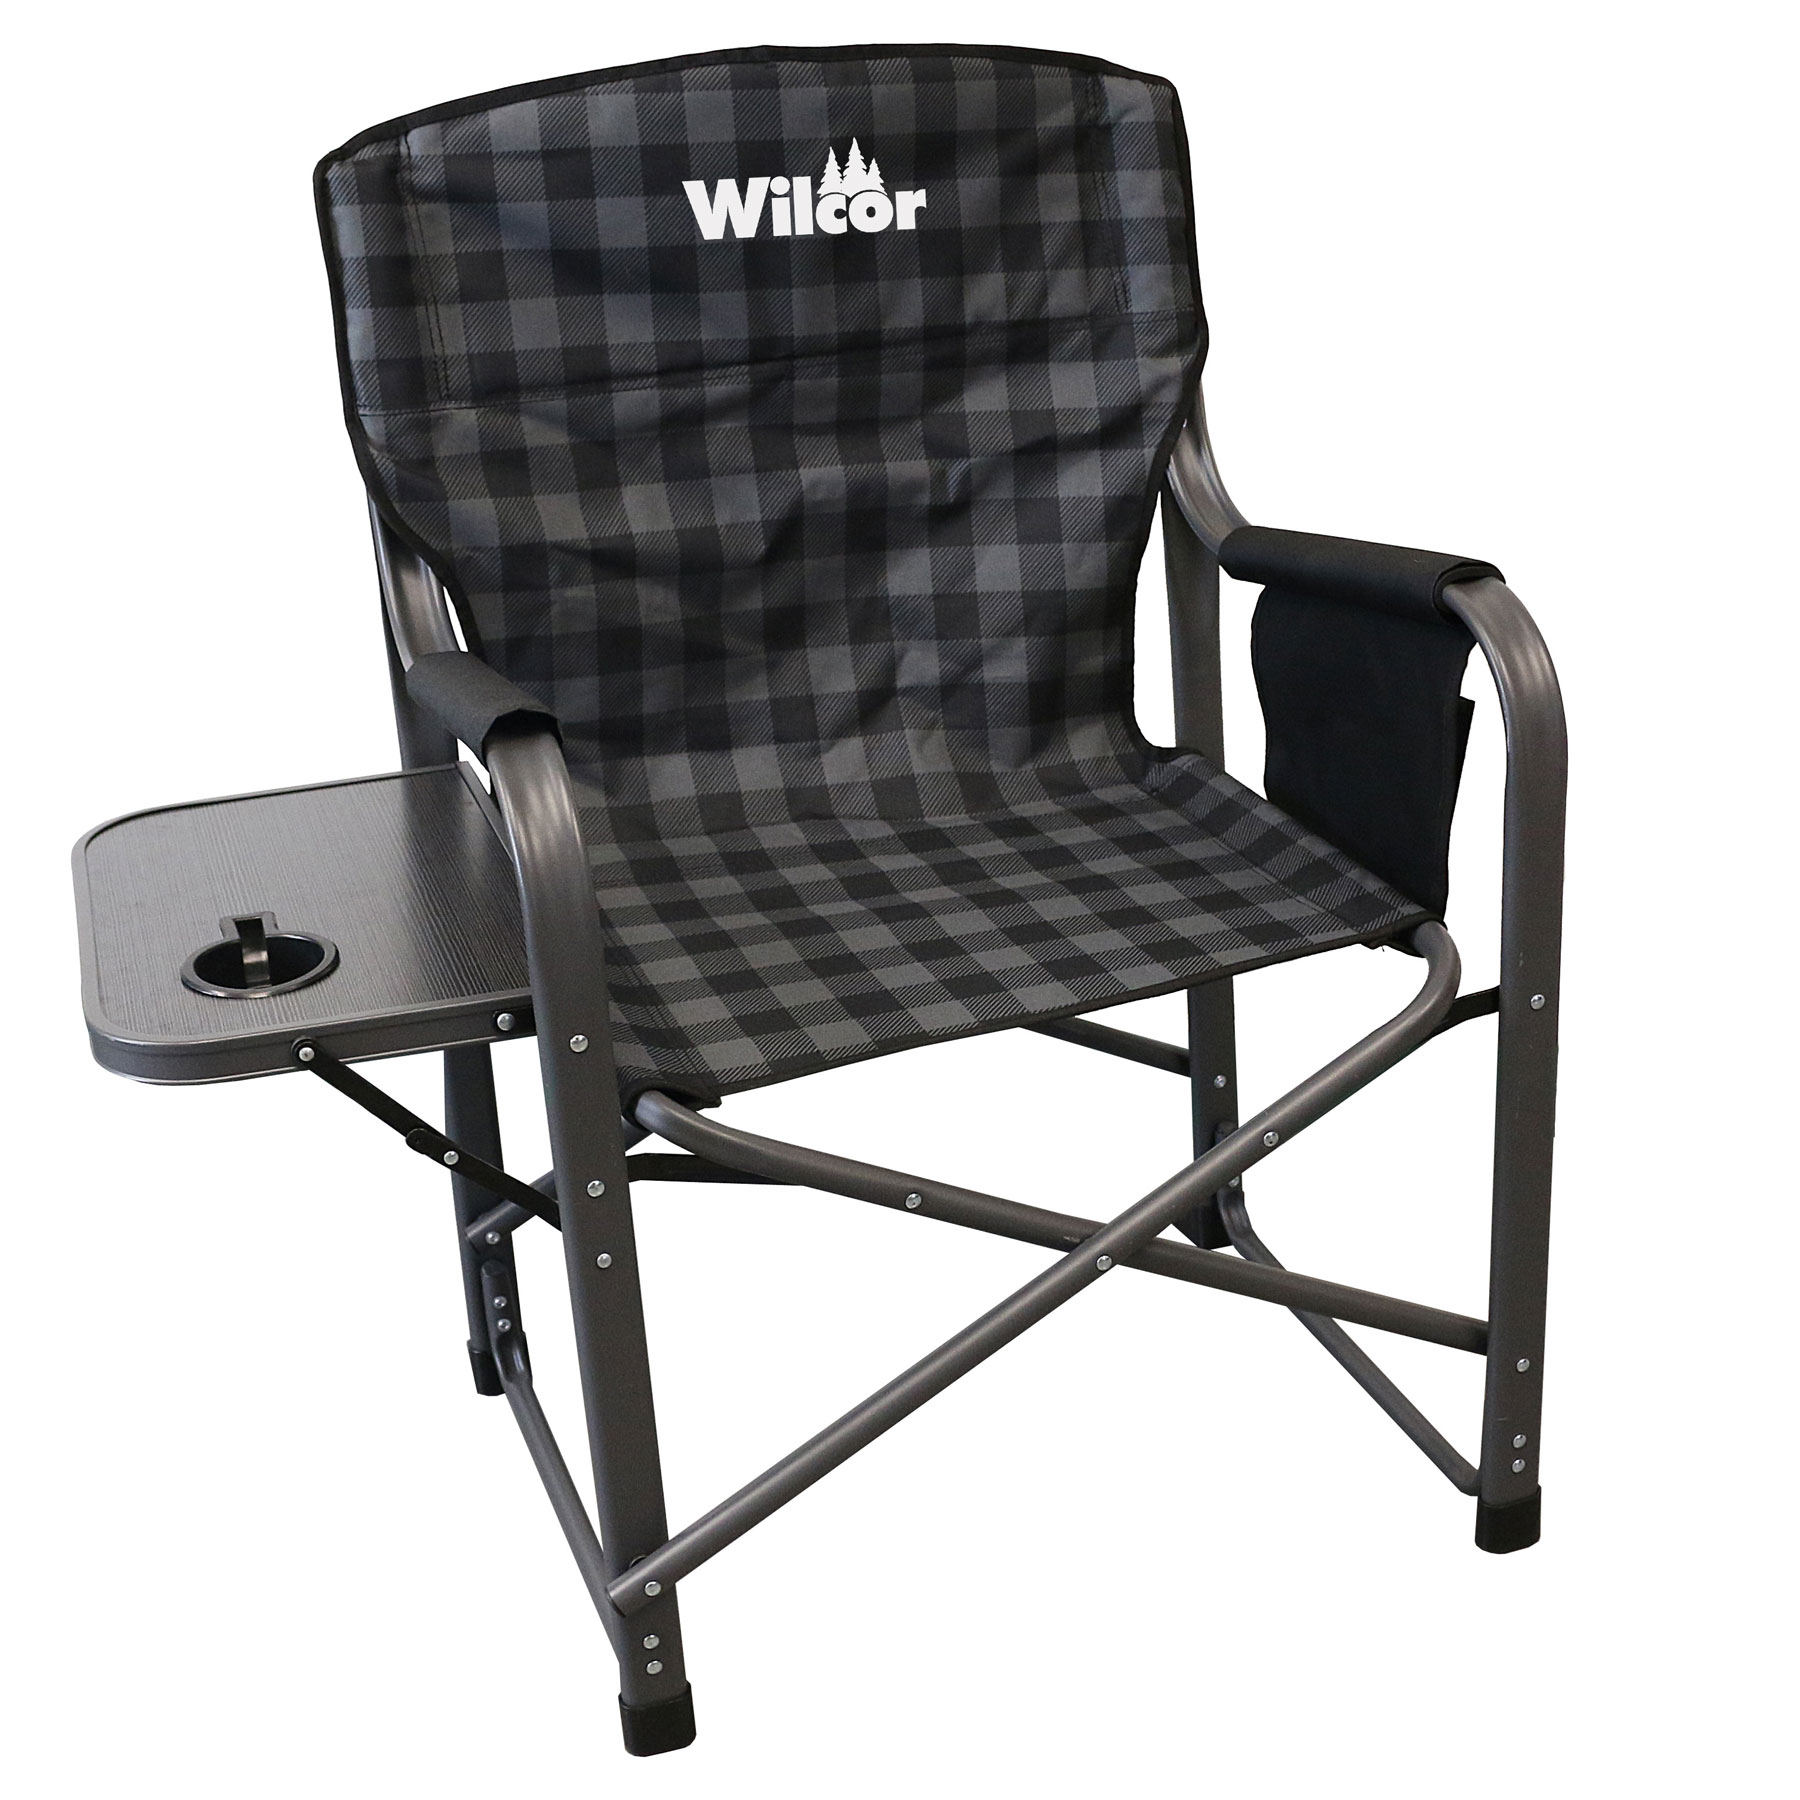 DIRECTOR CHAIR WITH SIDE TABLE DLX